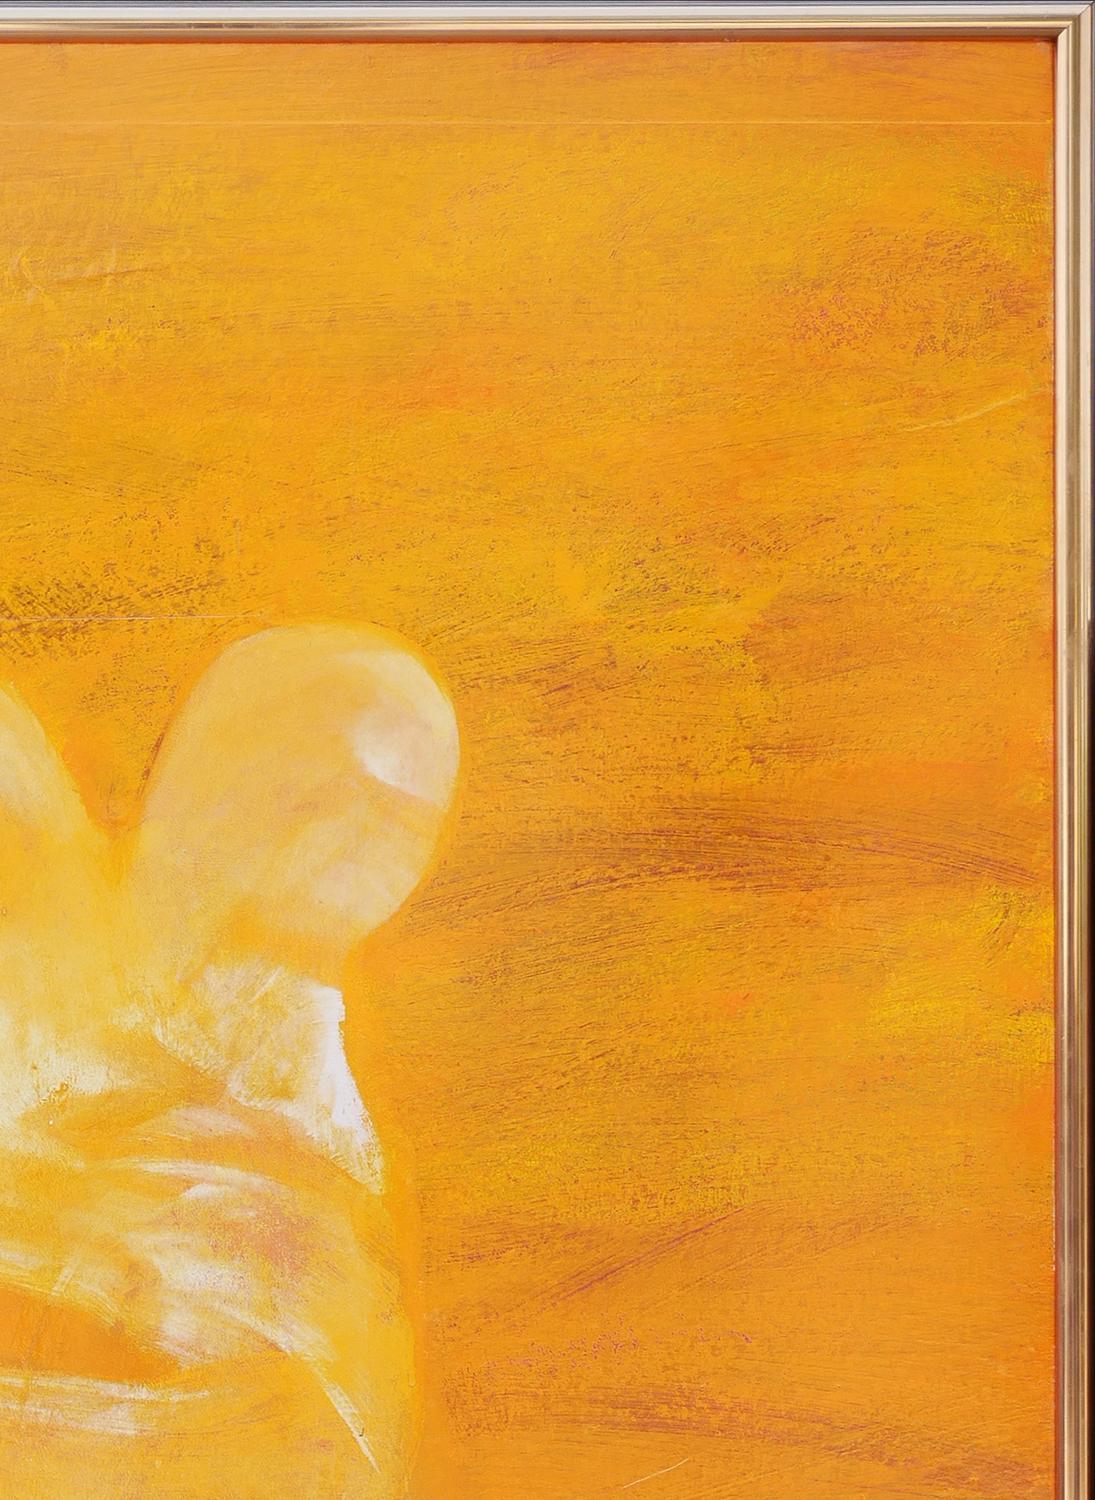 Orange-toned abstract figurative work by contemporary Missouri artist Michael Stack. The work features a light cream and silver silhouette of a headless female body set against an orange ombre background. Currently hung in a metallic silver frame.